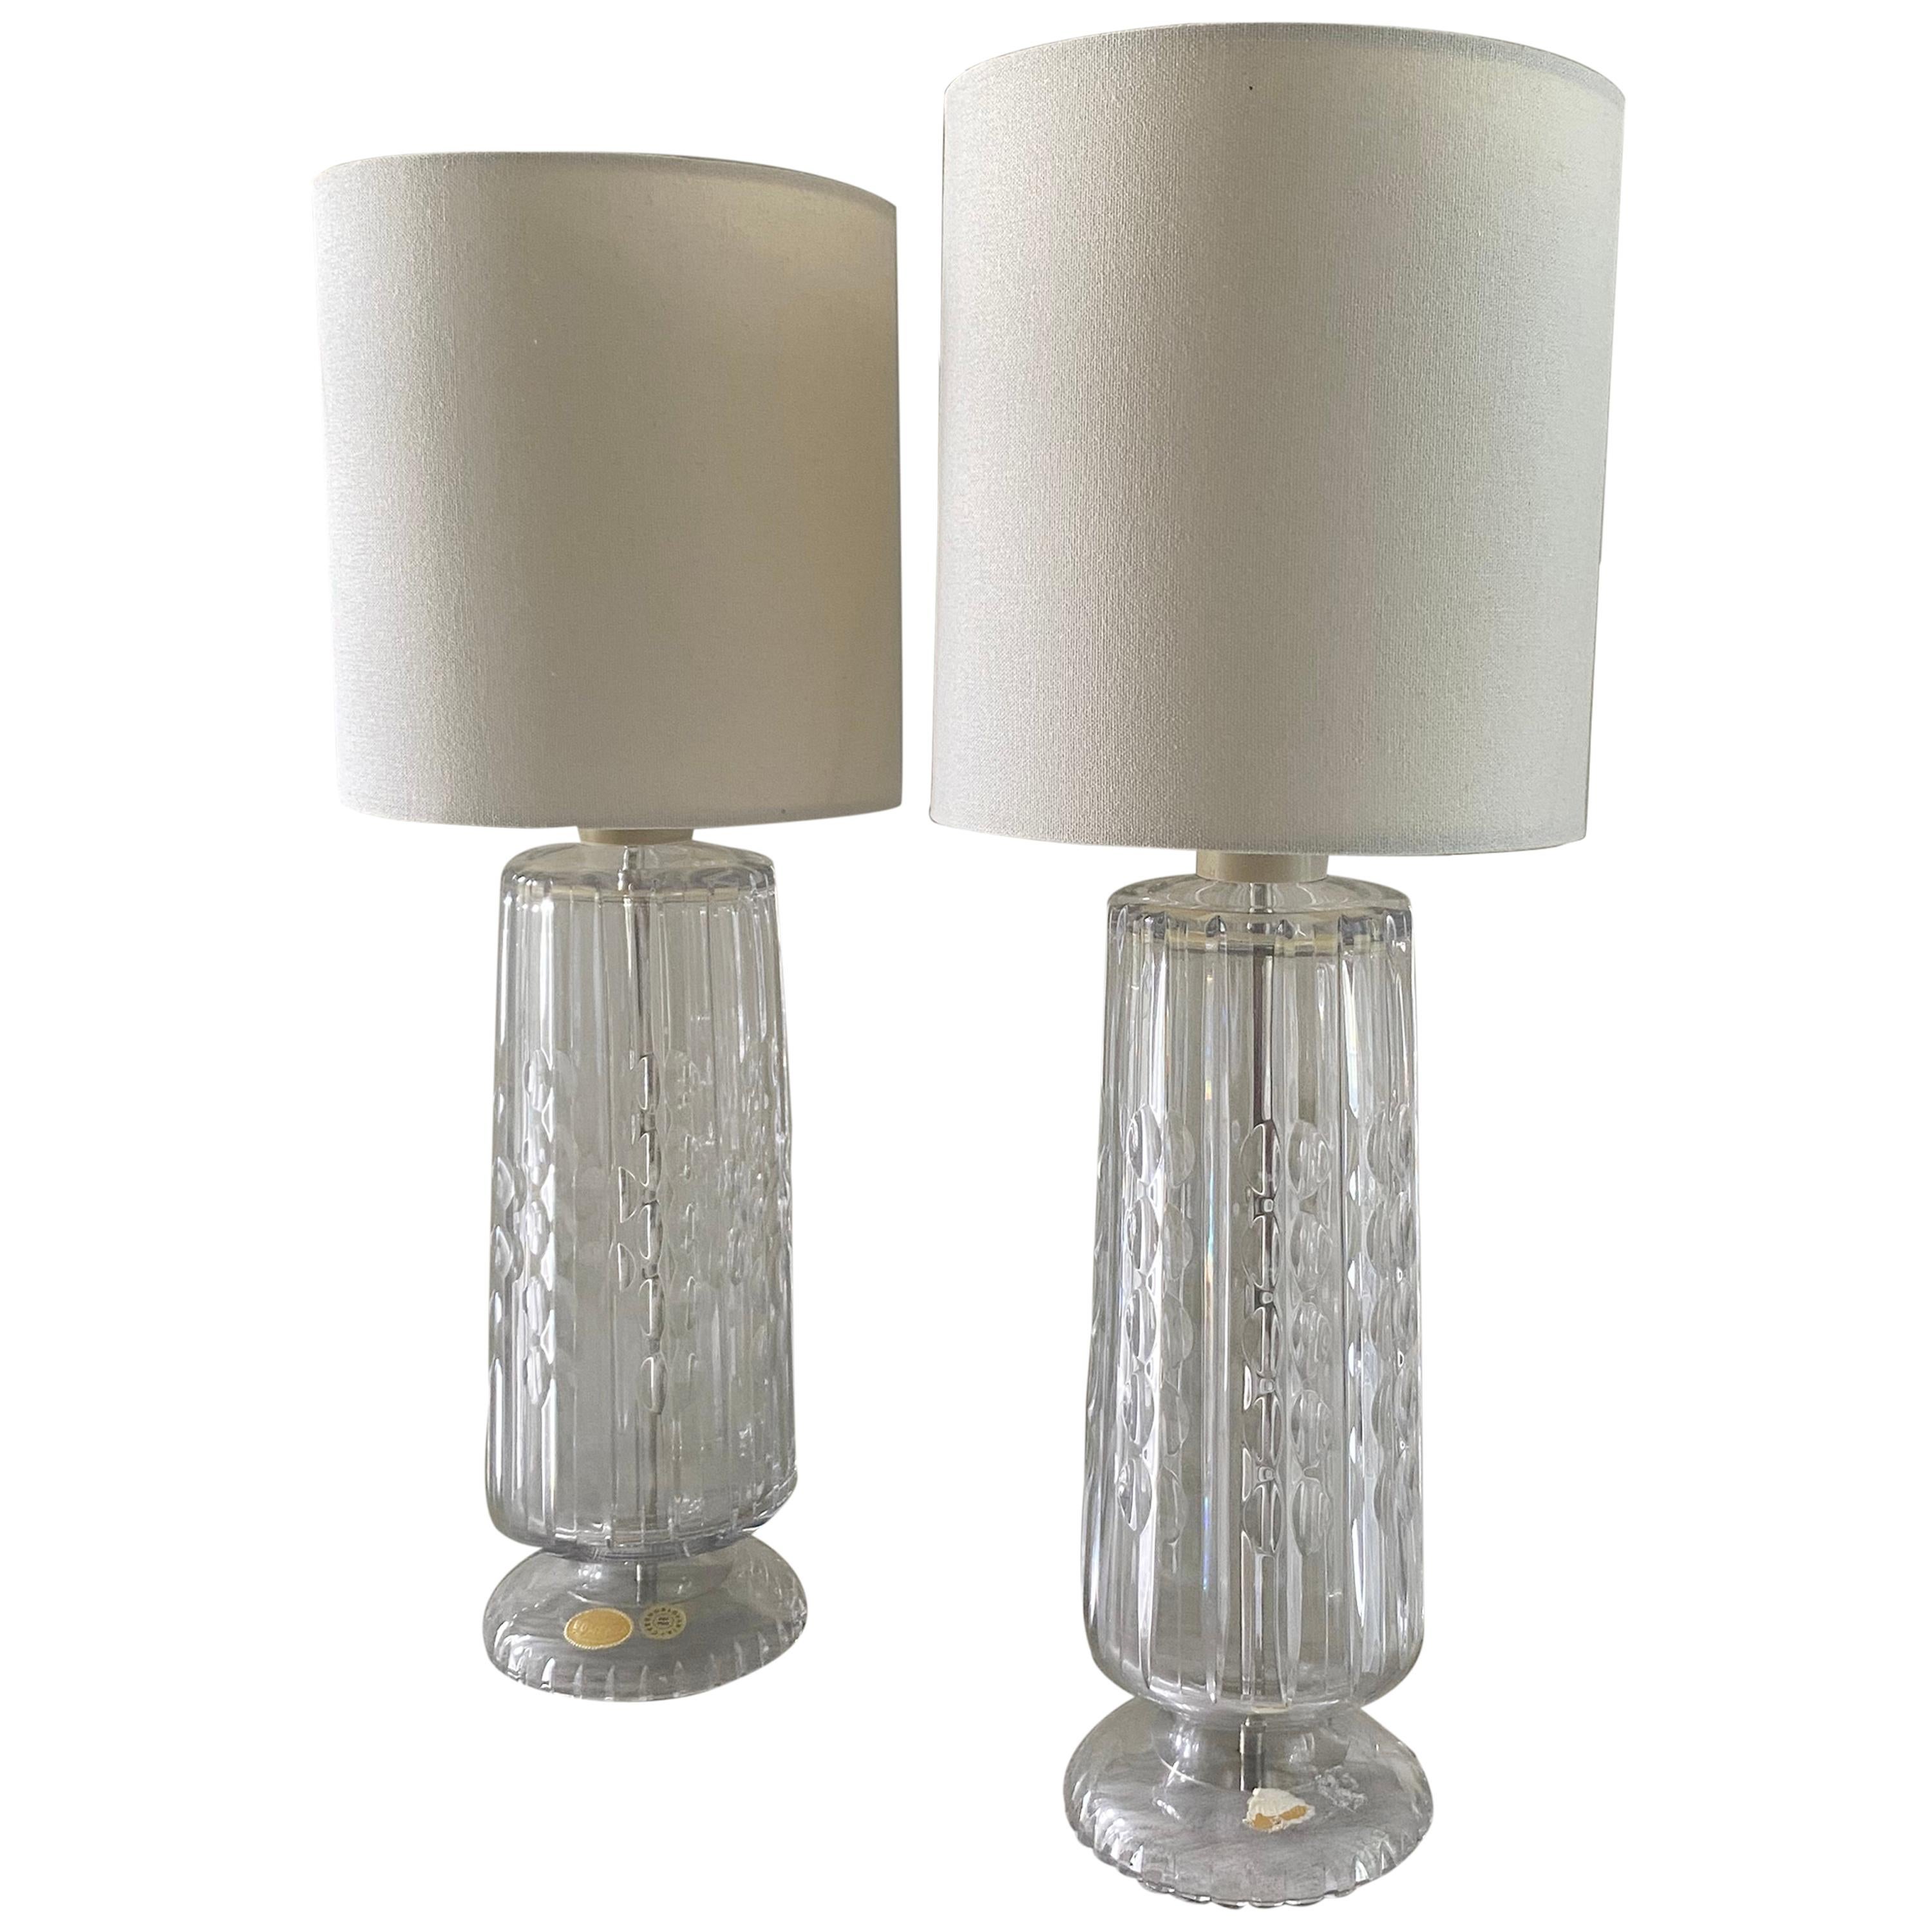 Pair of Table Lamps from Czechoslovakia